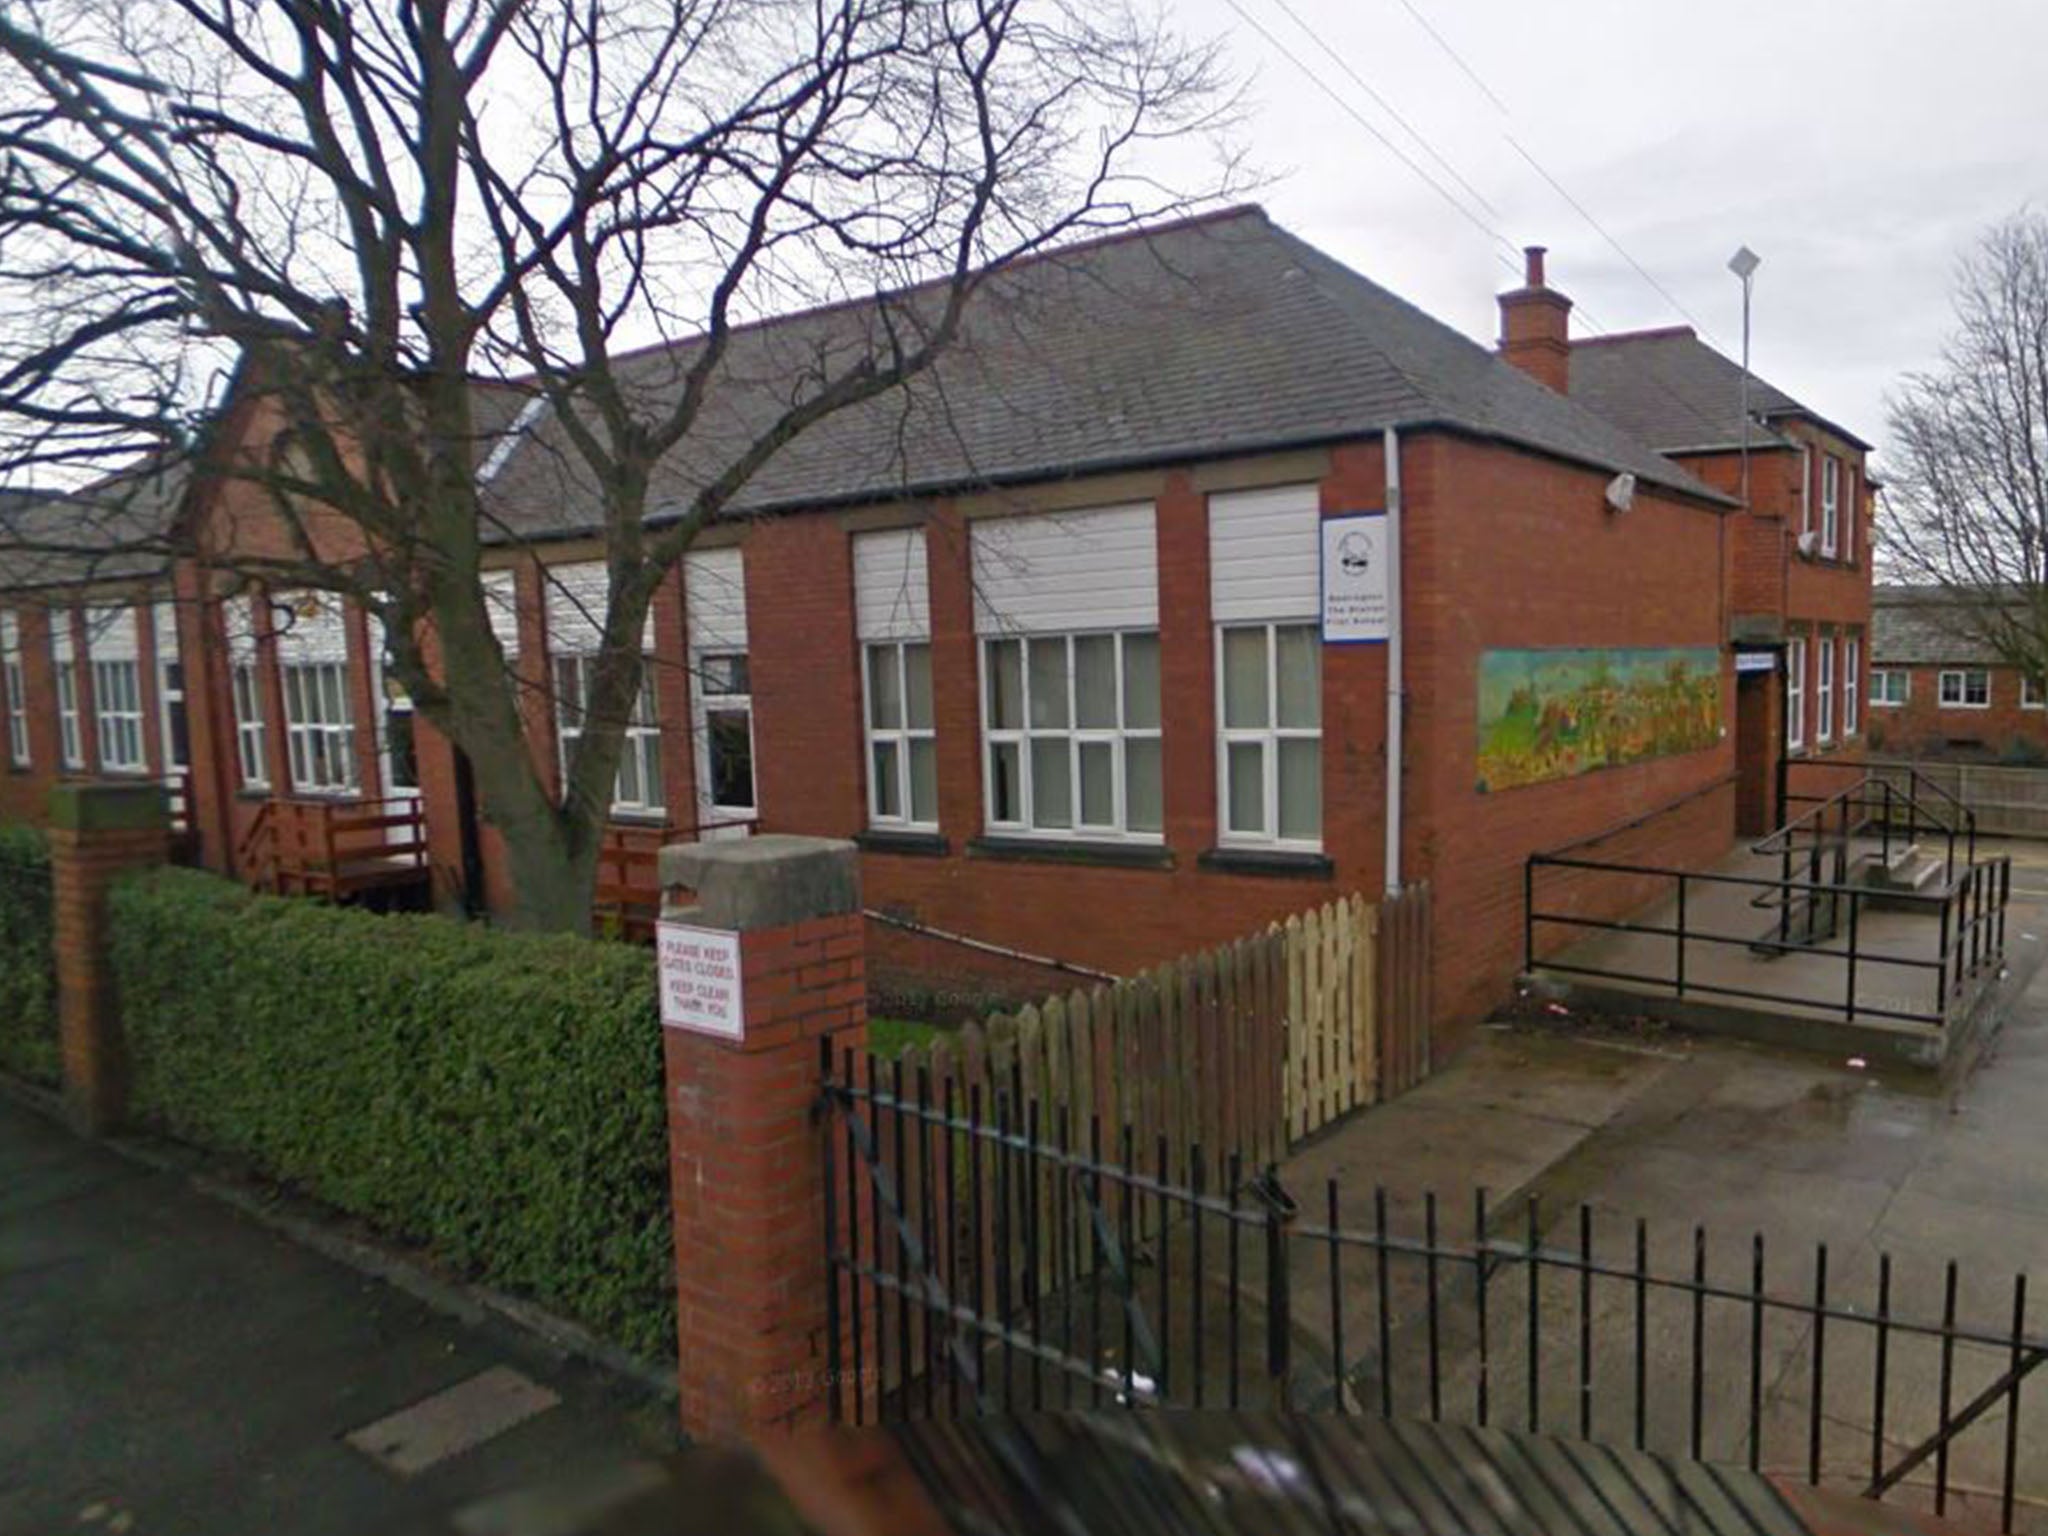 &#13;
The pupils at Bedlington Primary Scxhool will not be suspended&#13;